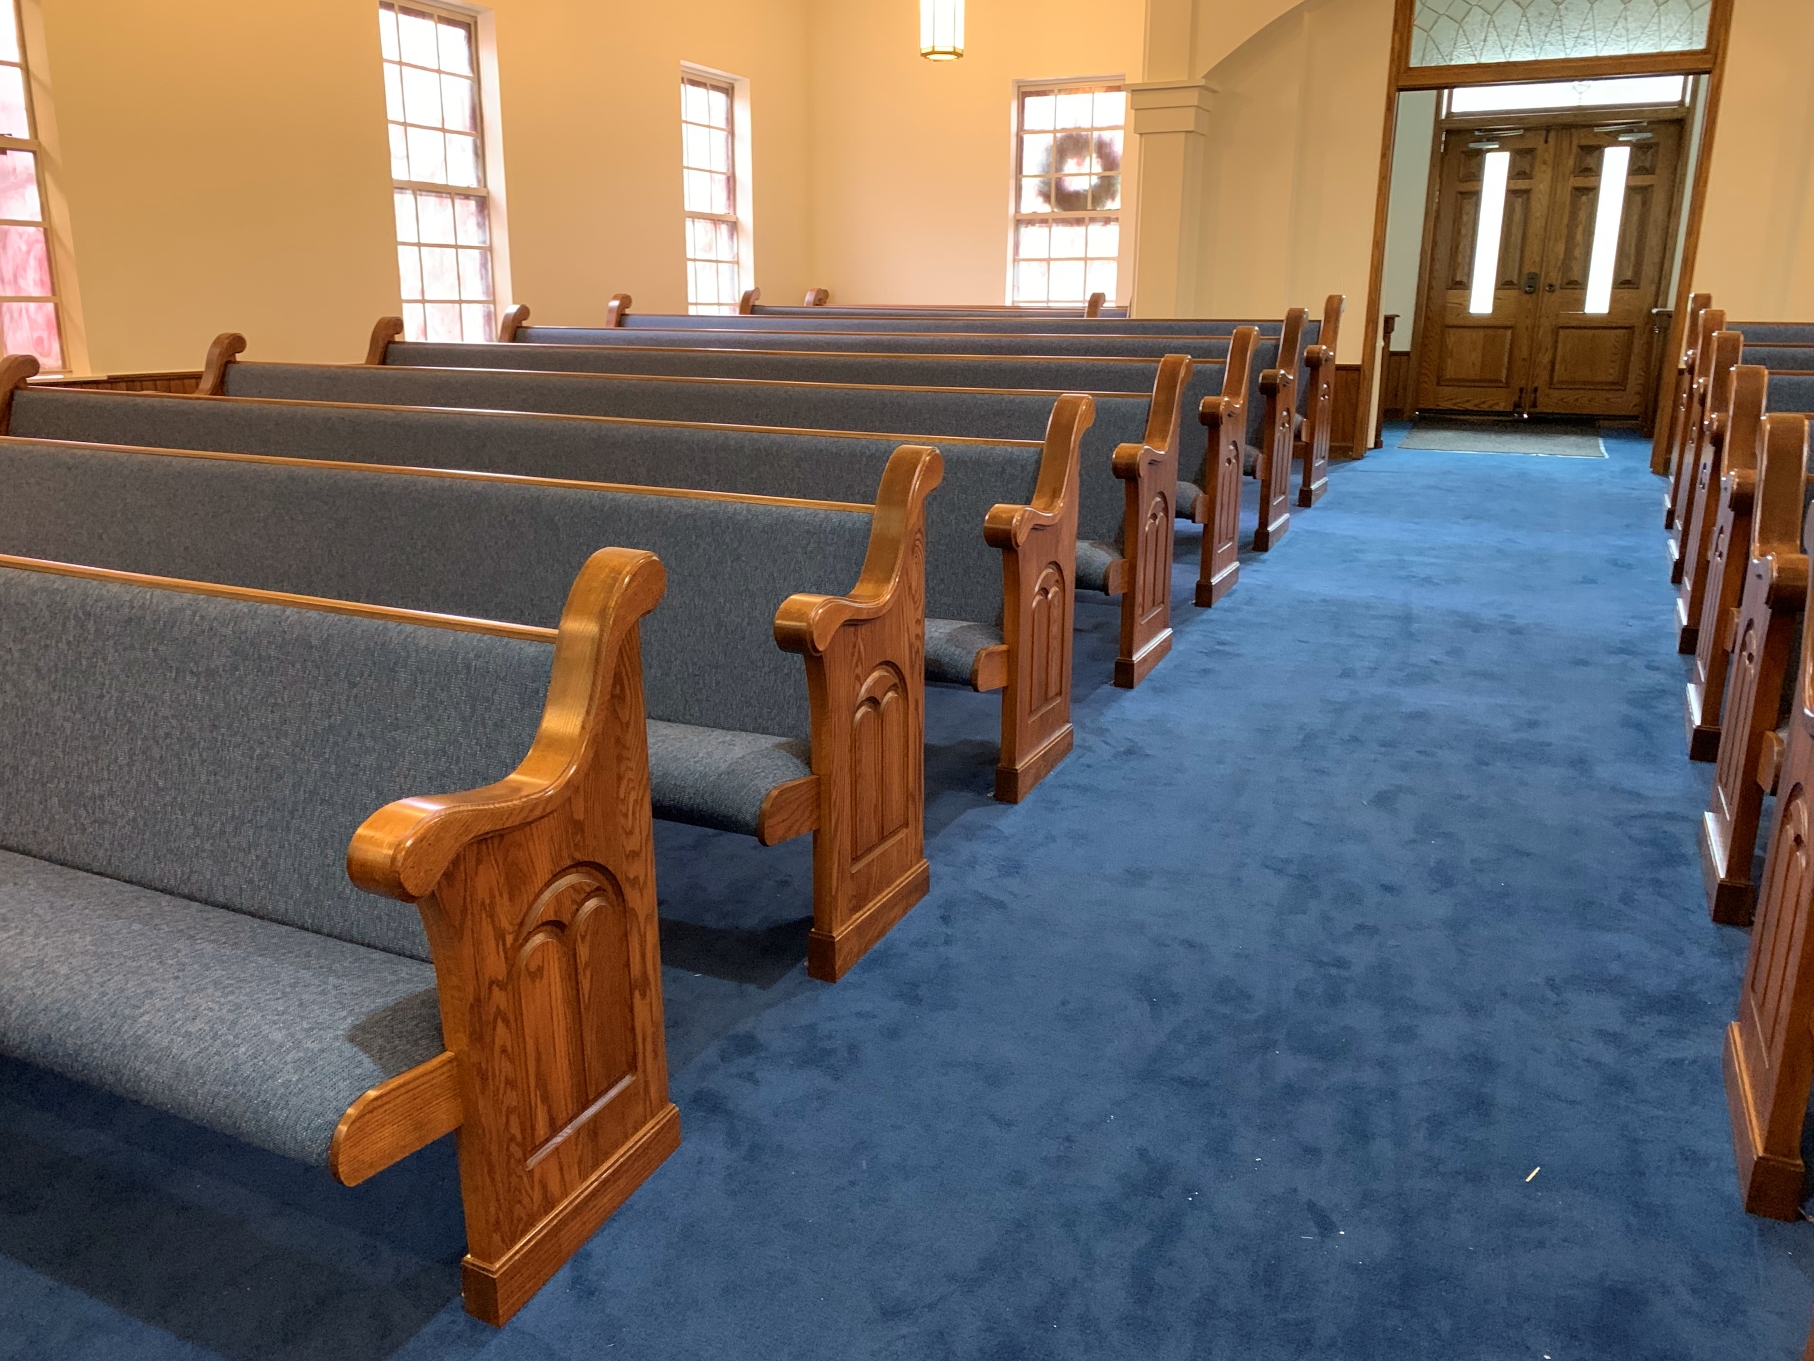 New Church Pews with Traditional Pew Ends installed recently in Banner Elk, North Carolina by Woods Church Interiors